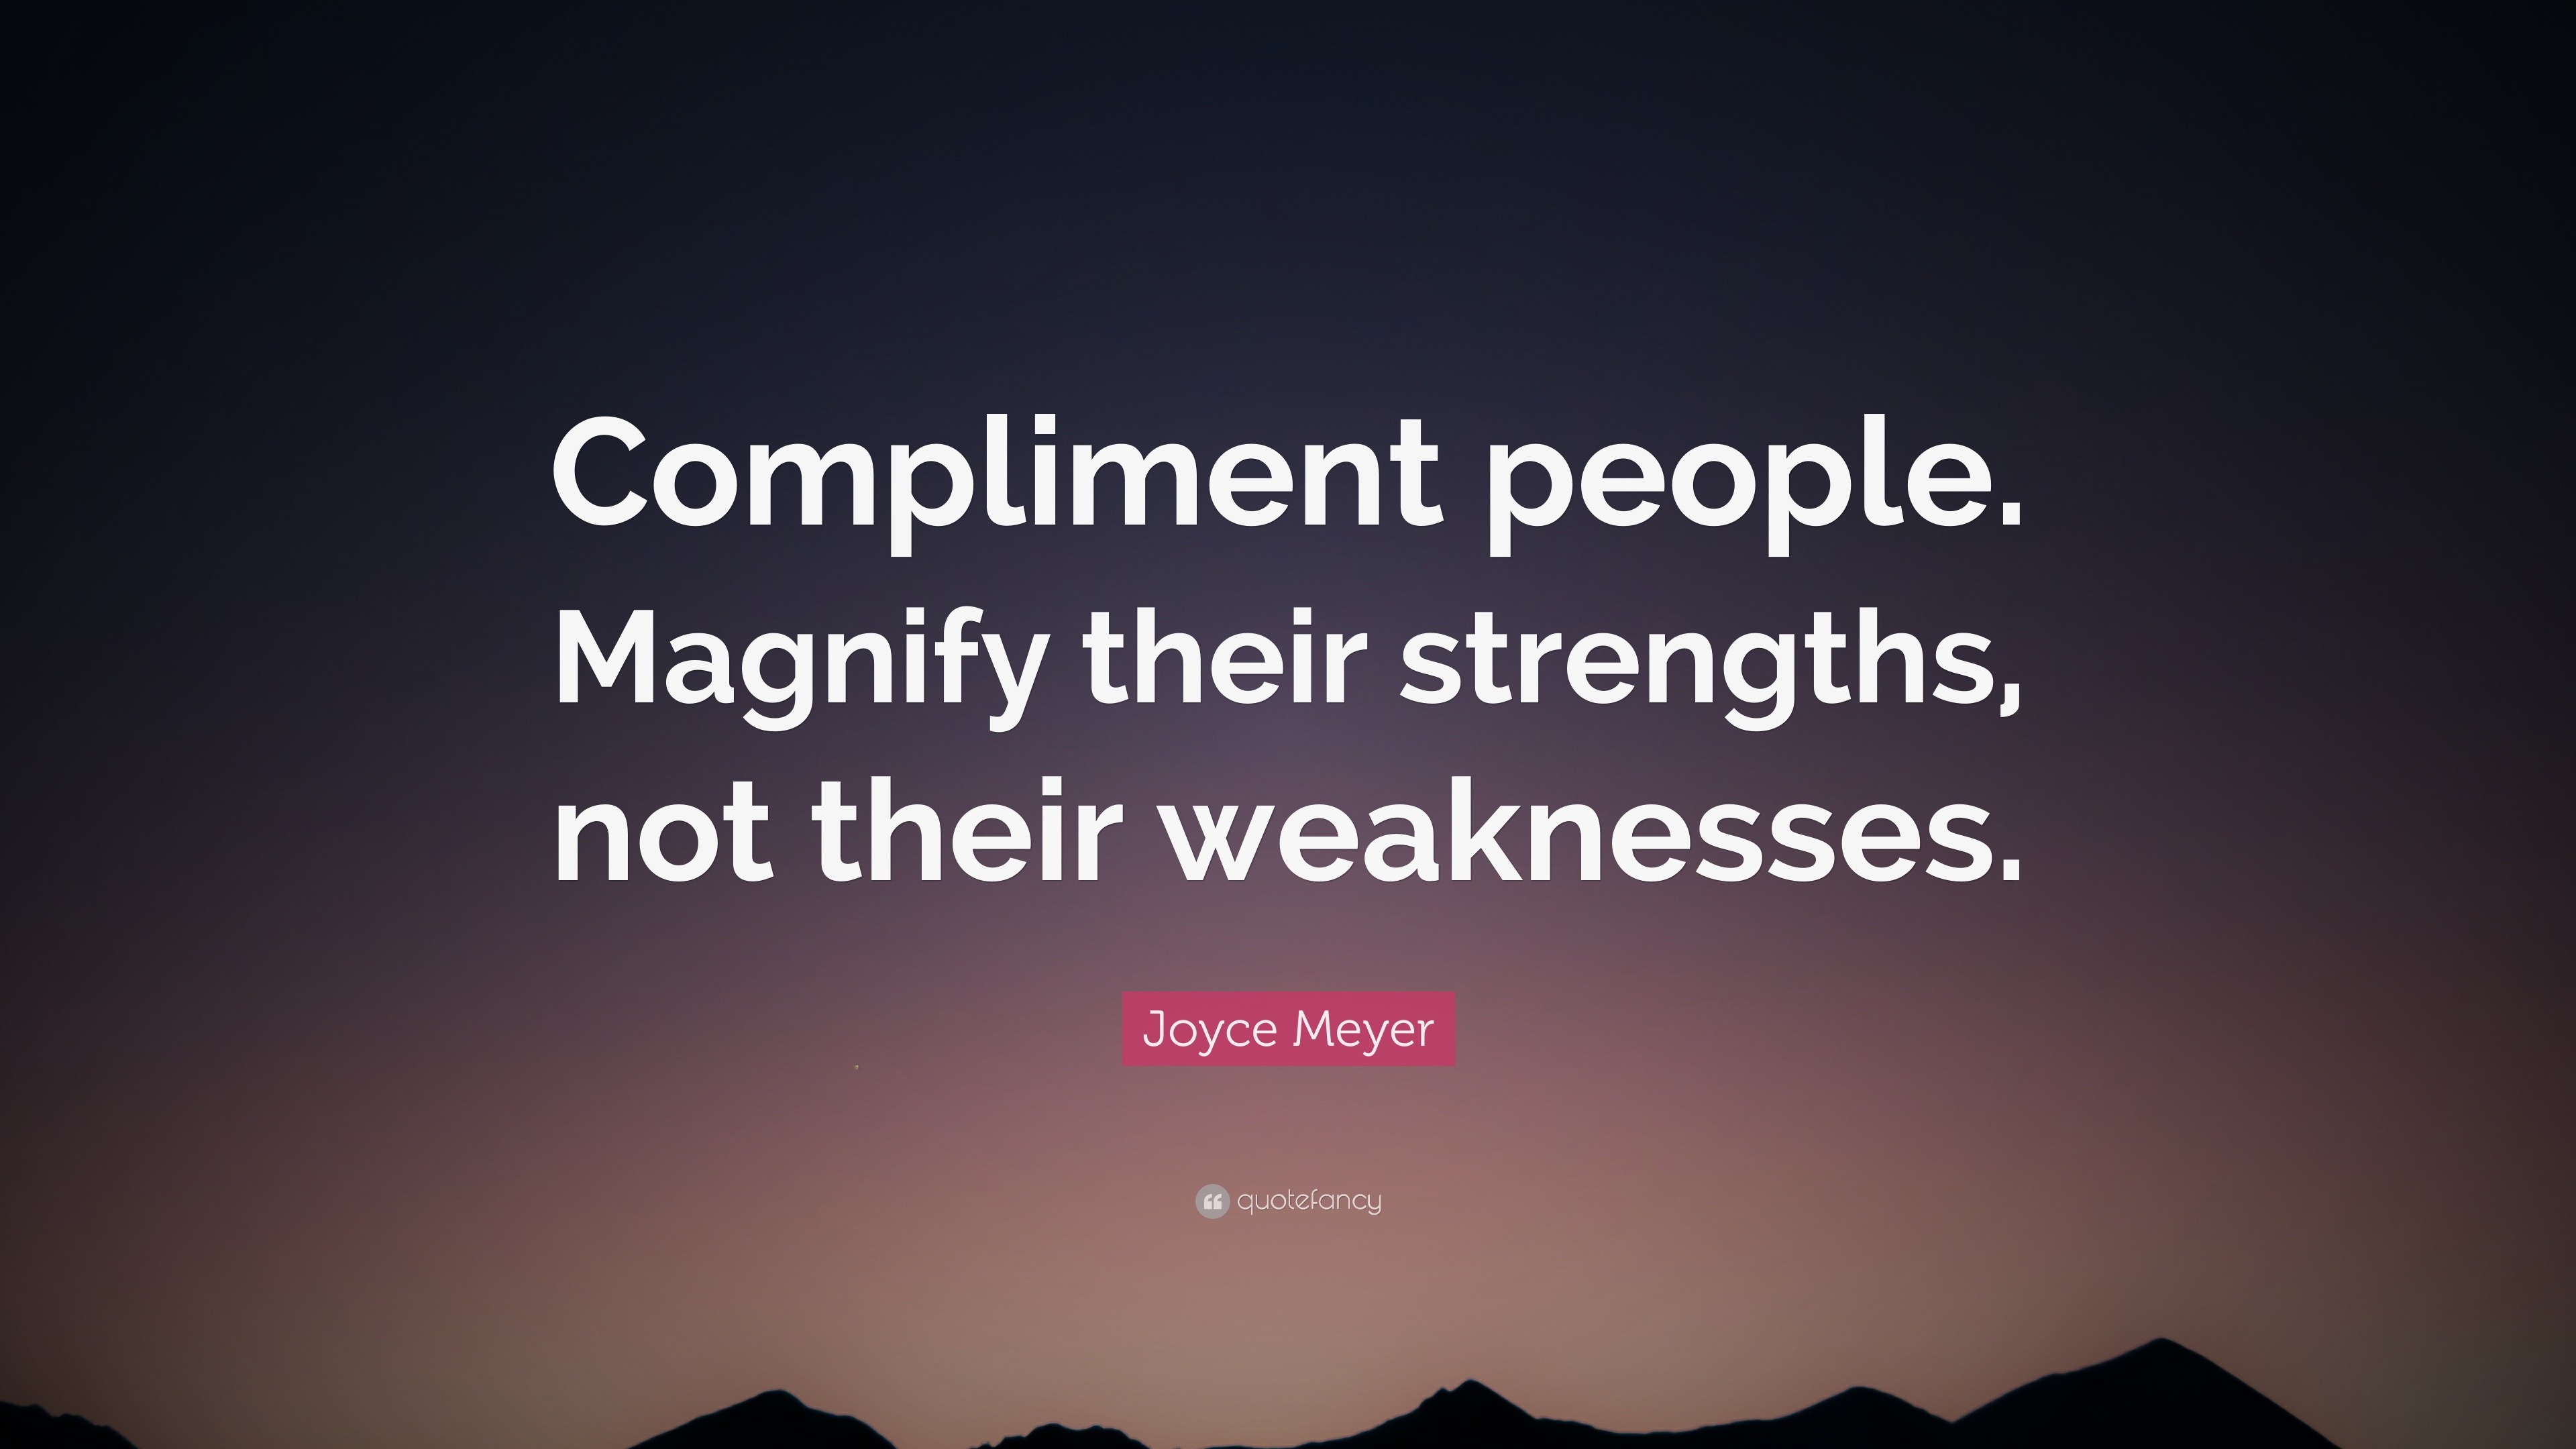 Joyce Meyer Quote: “Compliment people. Magnify their strengths, not